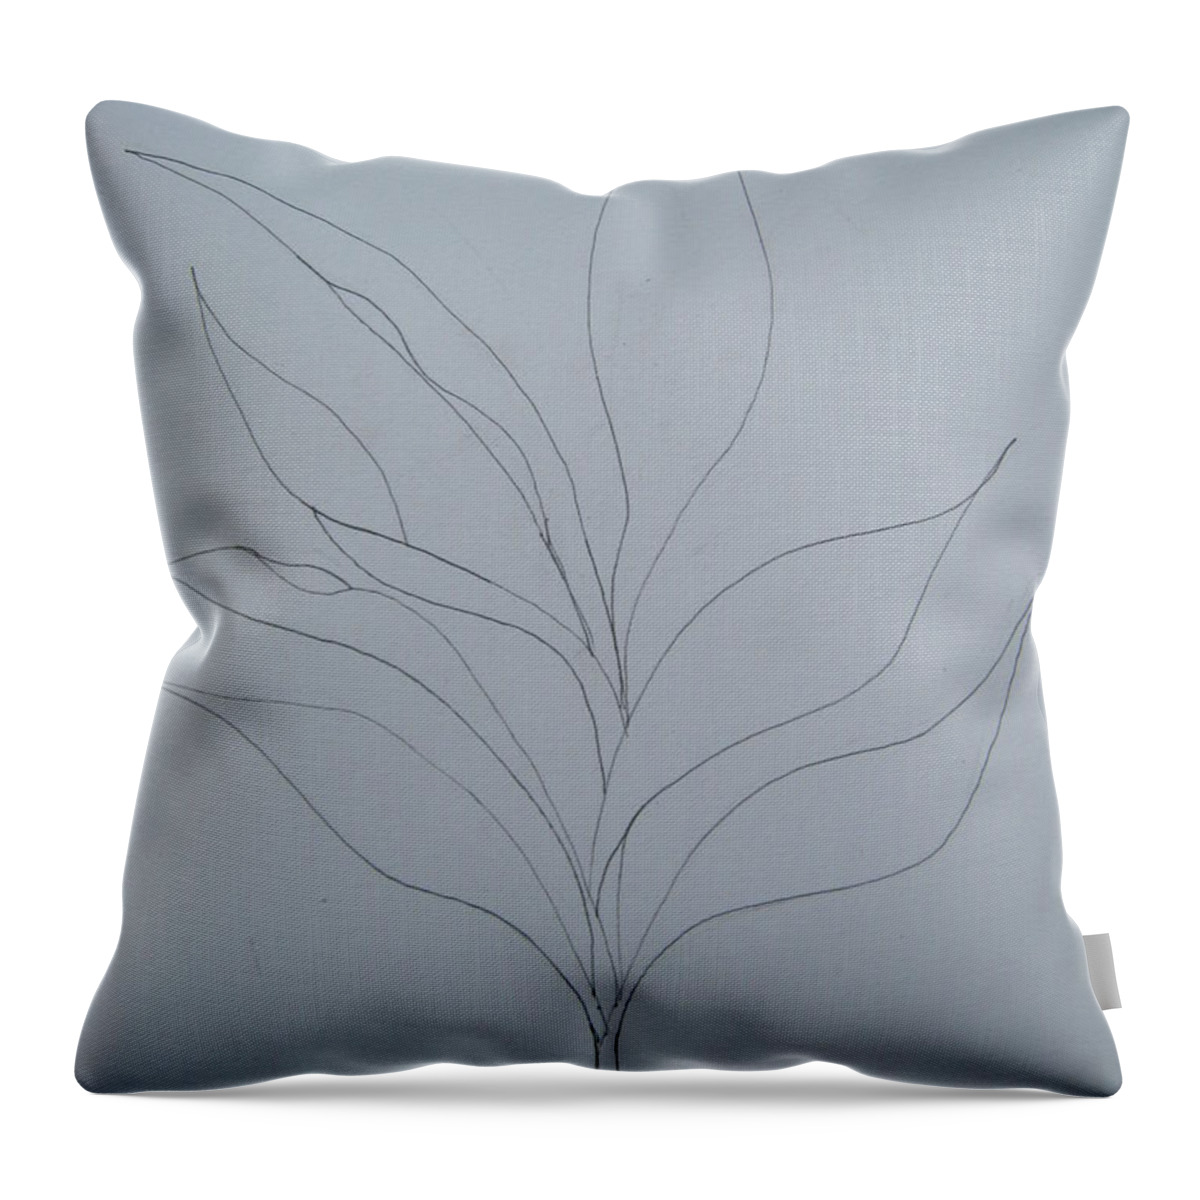 Leaves Throw Pillow featuring the drawing Leaves #1 by Pucharaporn Songsri